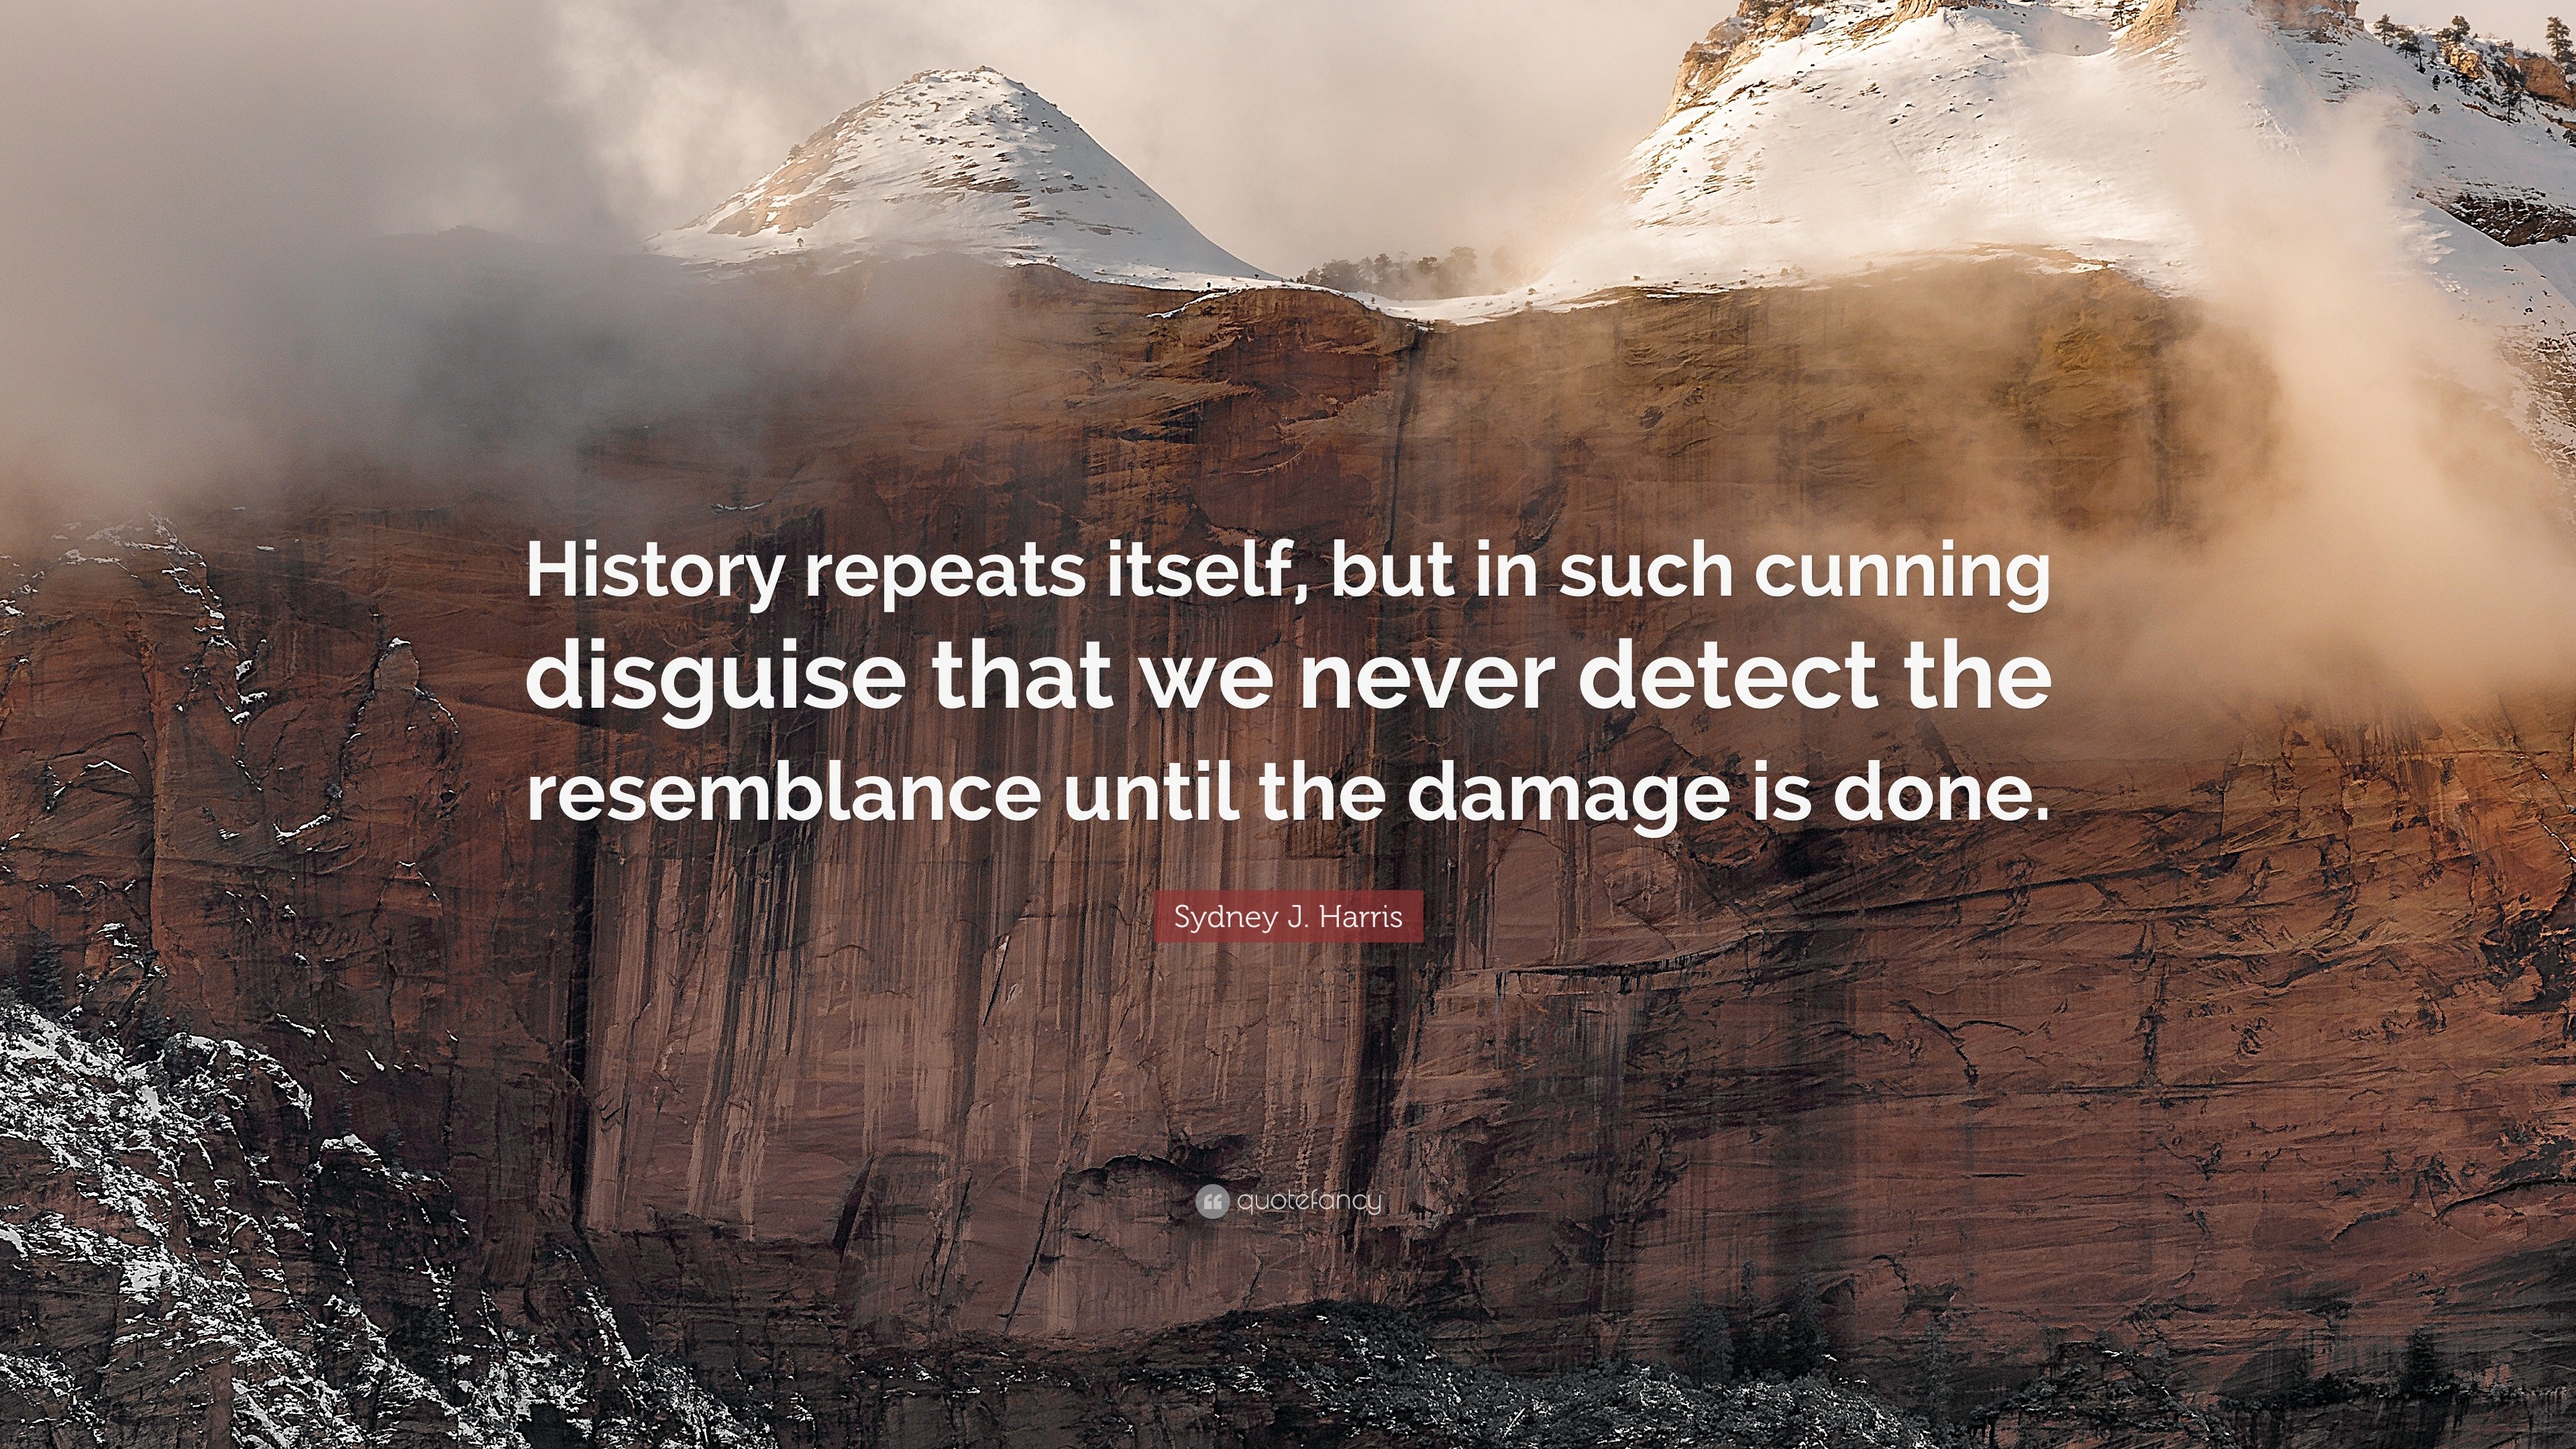 Sydney J. Harris Quote: “History repeats itself, but in such cunning